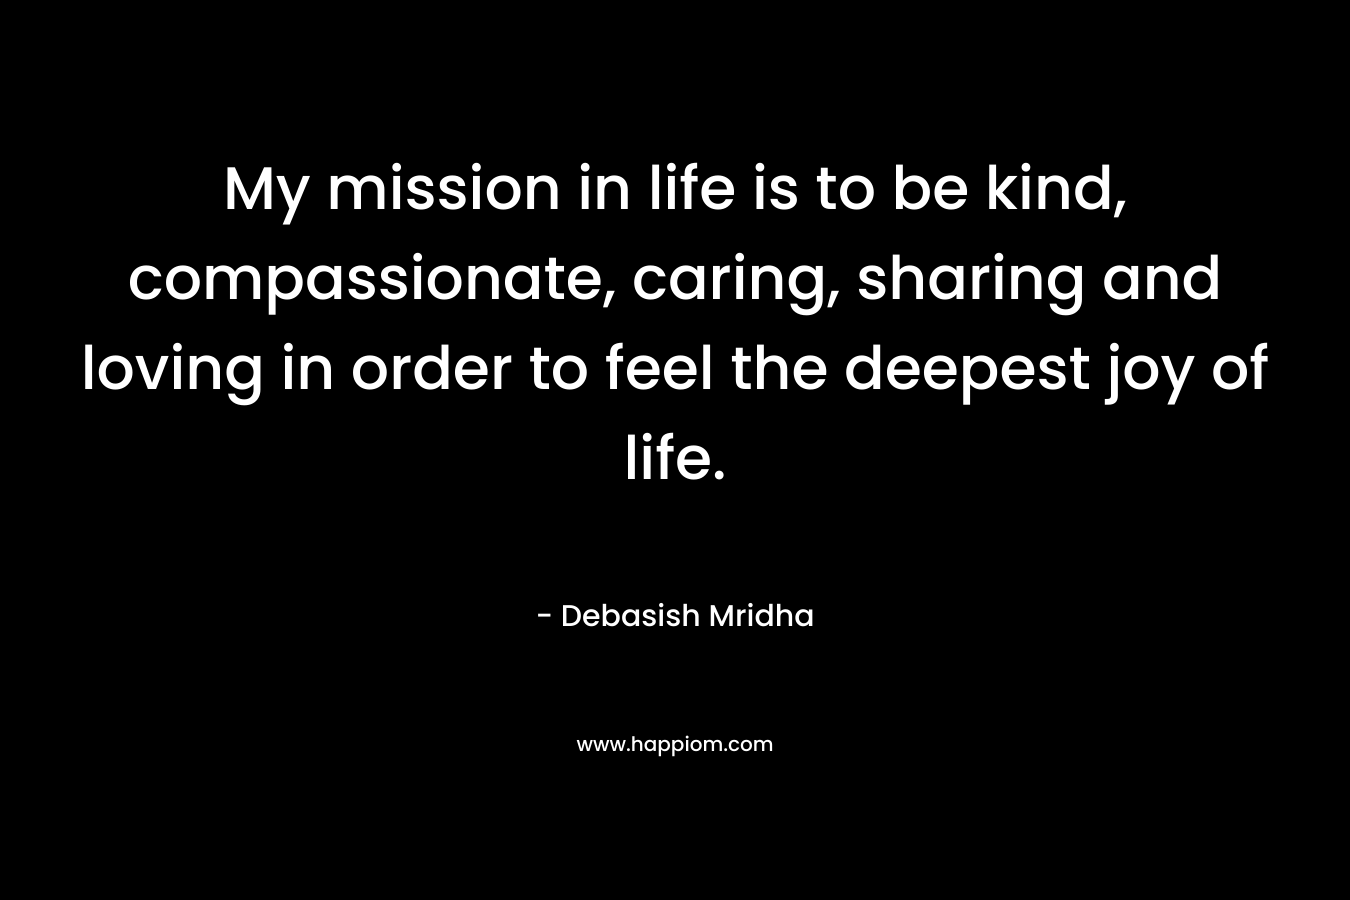 My mission in life is to be kind, compassionate, caring, sharing and loving in order to feel the deepest joy of life.